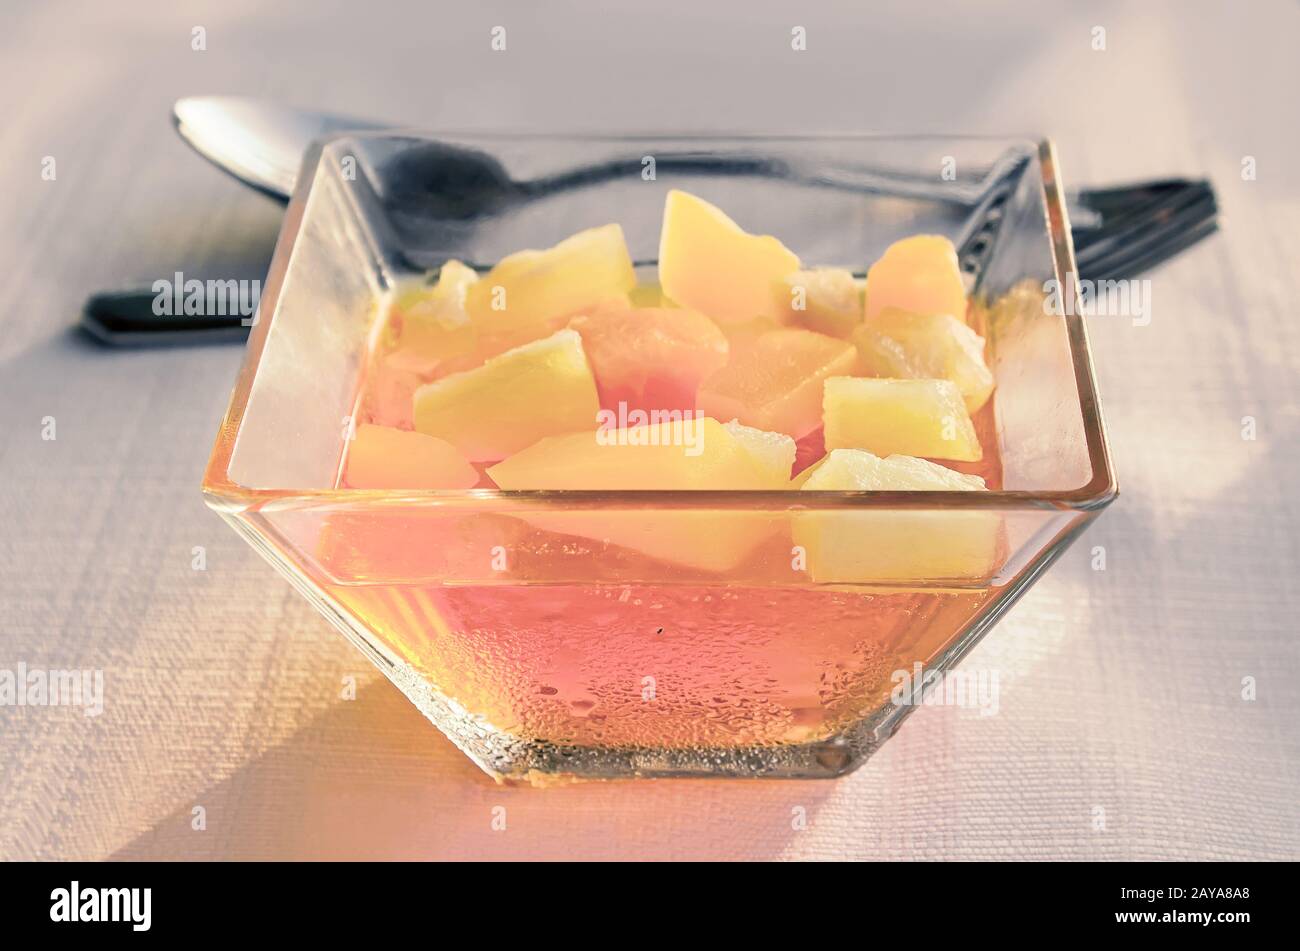 Dessert: fruit pieces in a sugar syrup. Stock Photo